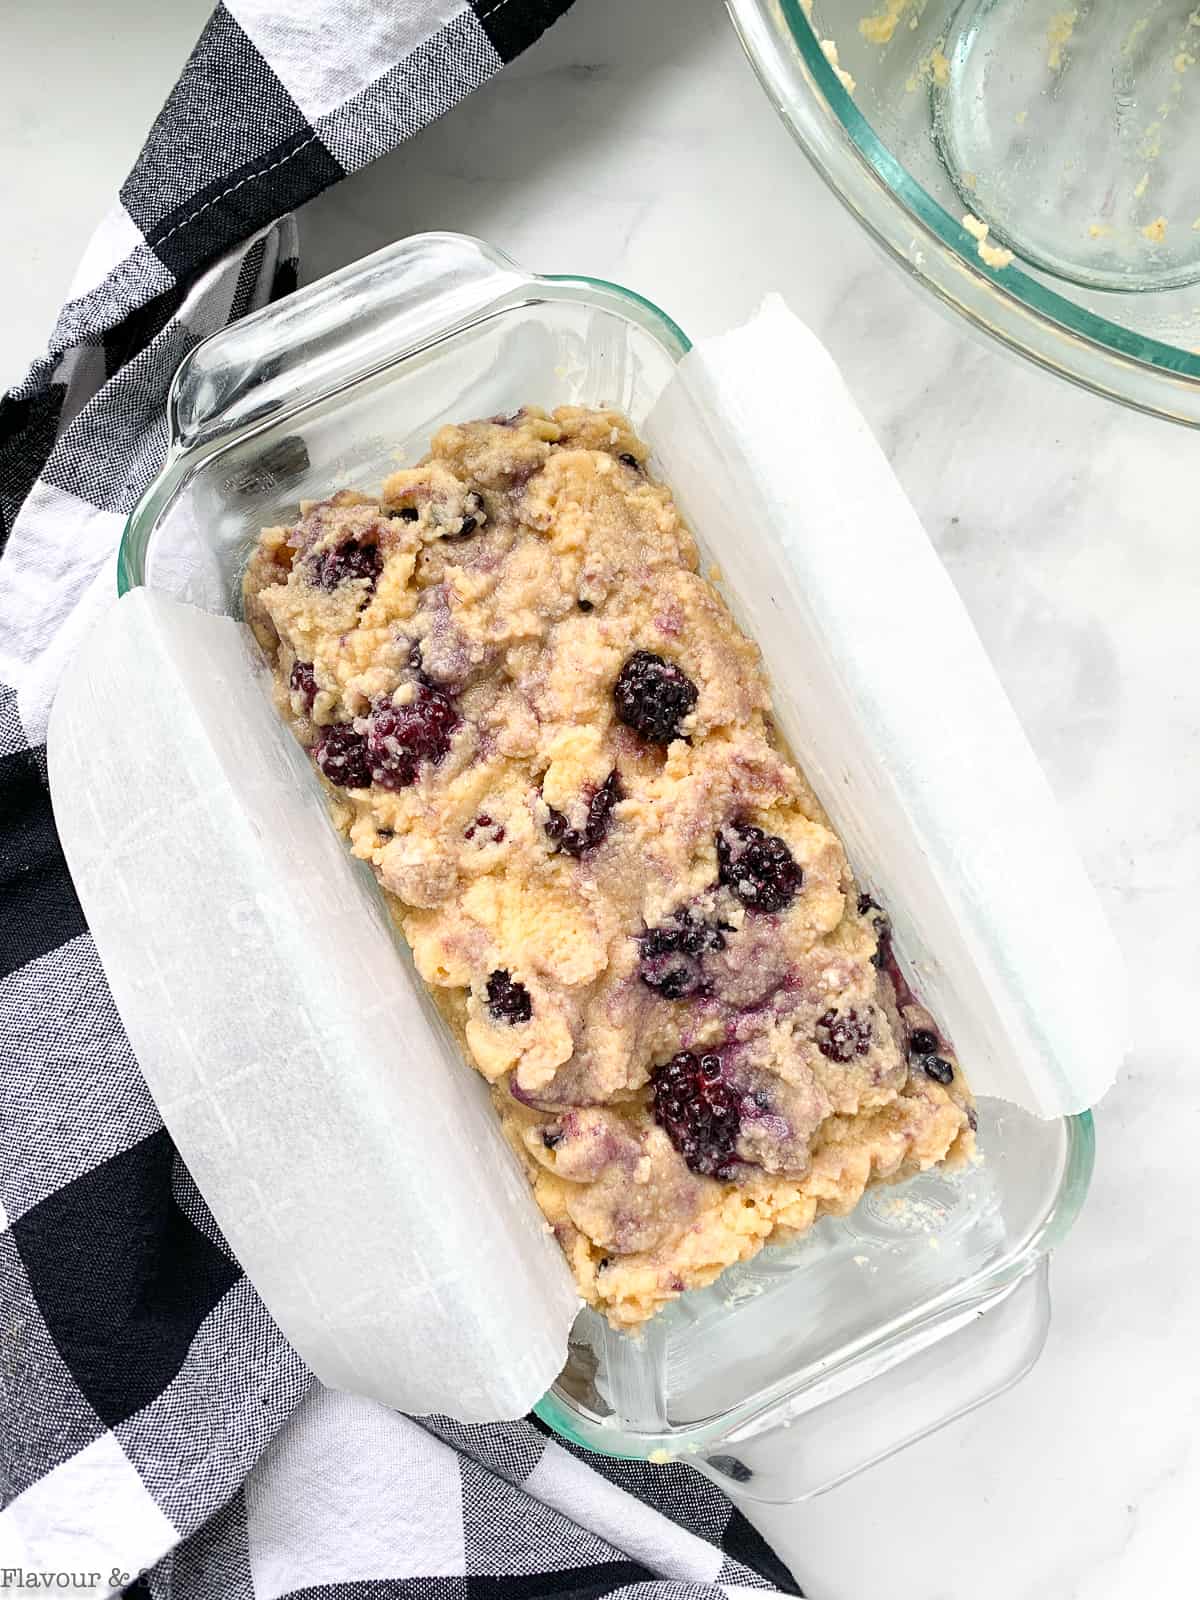 Blackberry loaf in a glass loaf pan ready to bake.